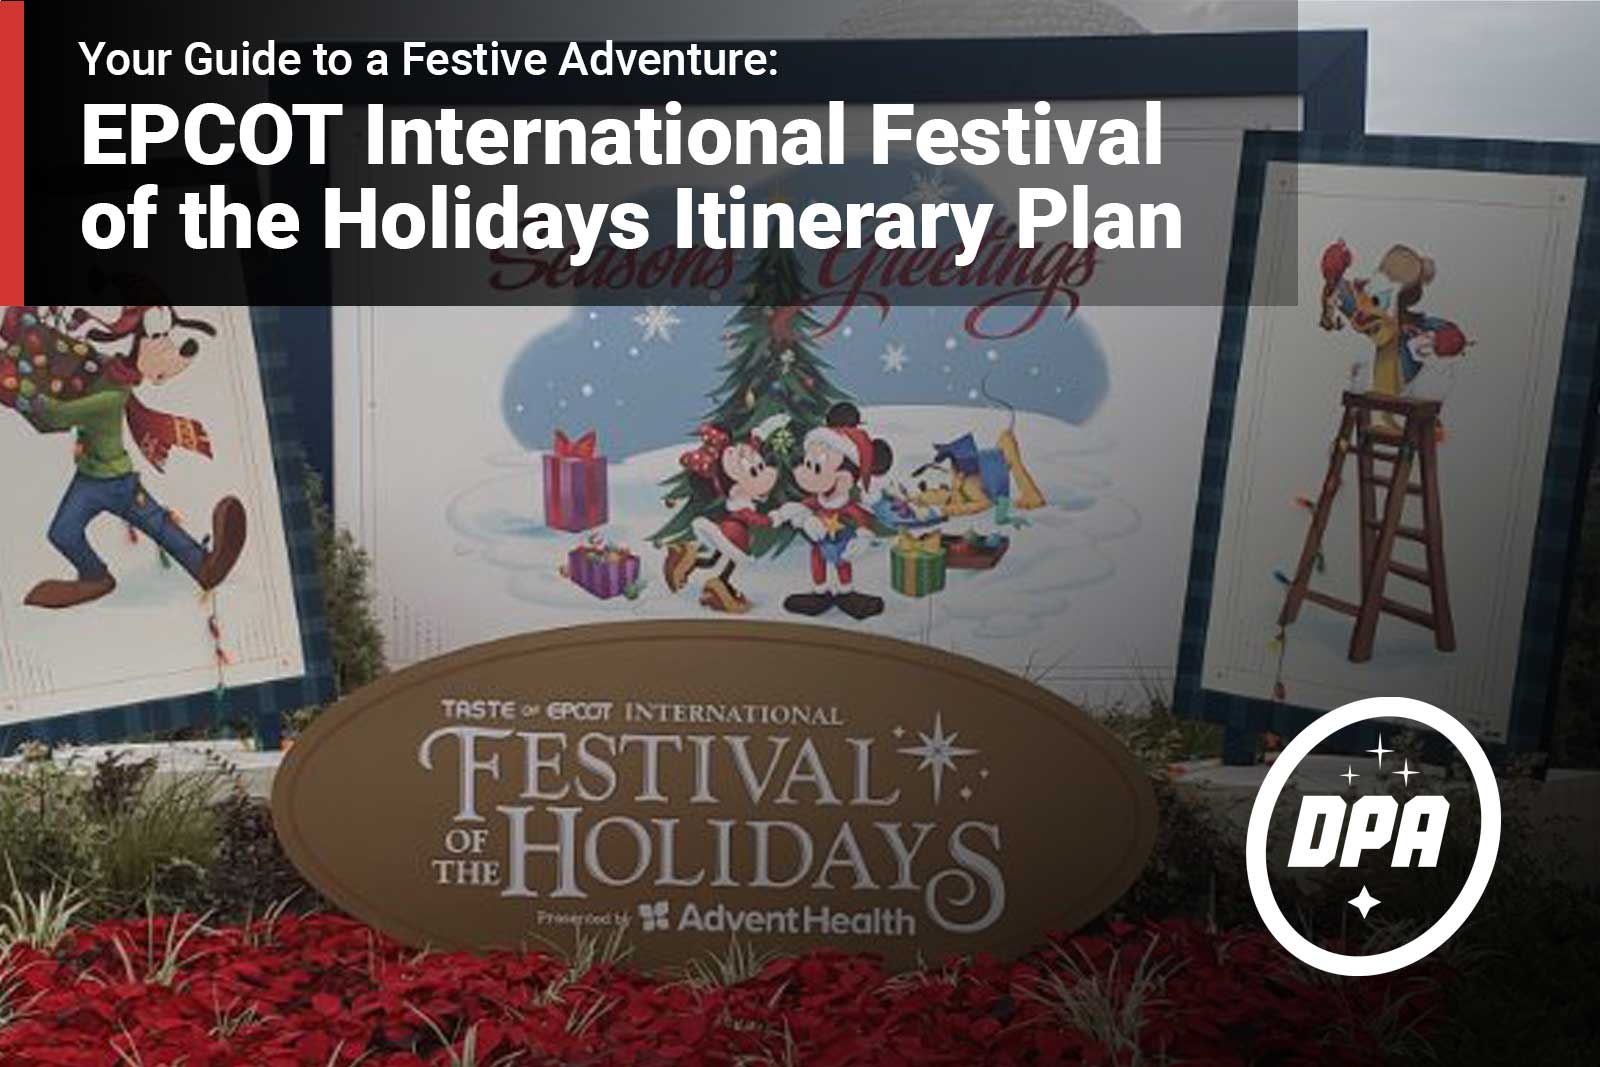 EPCOT International Festival of the Holidays Itinerary Plan: Your Guide to a Festive Adventure